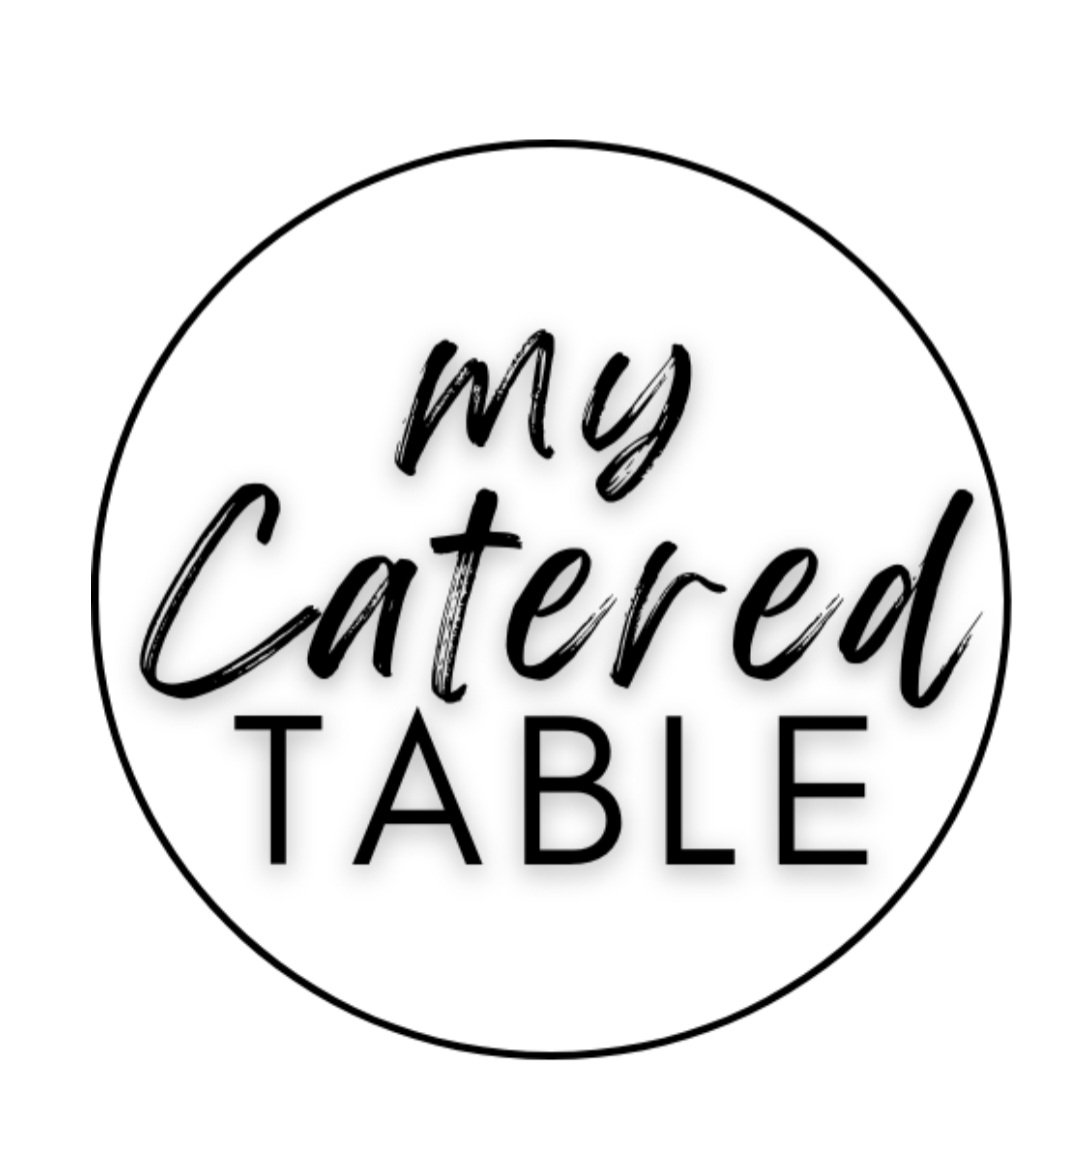 My Catered Table